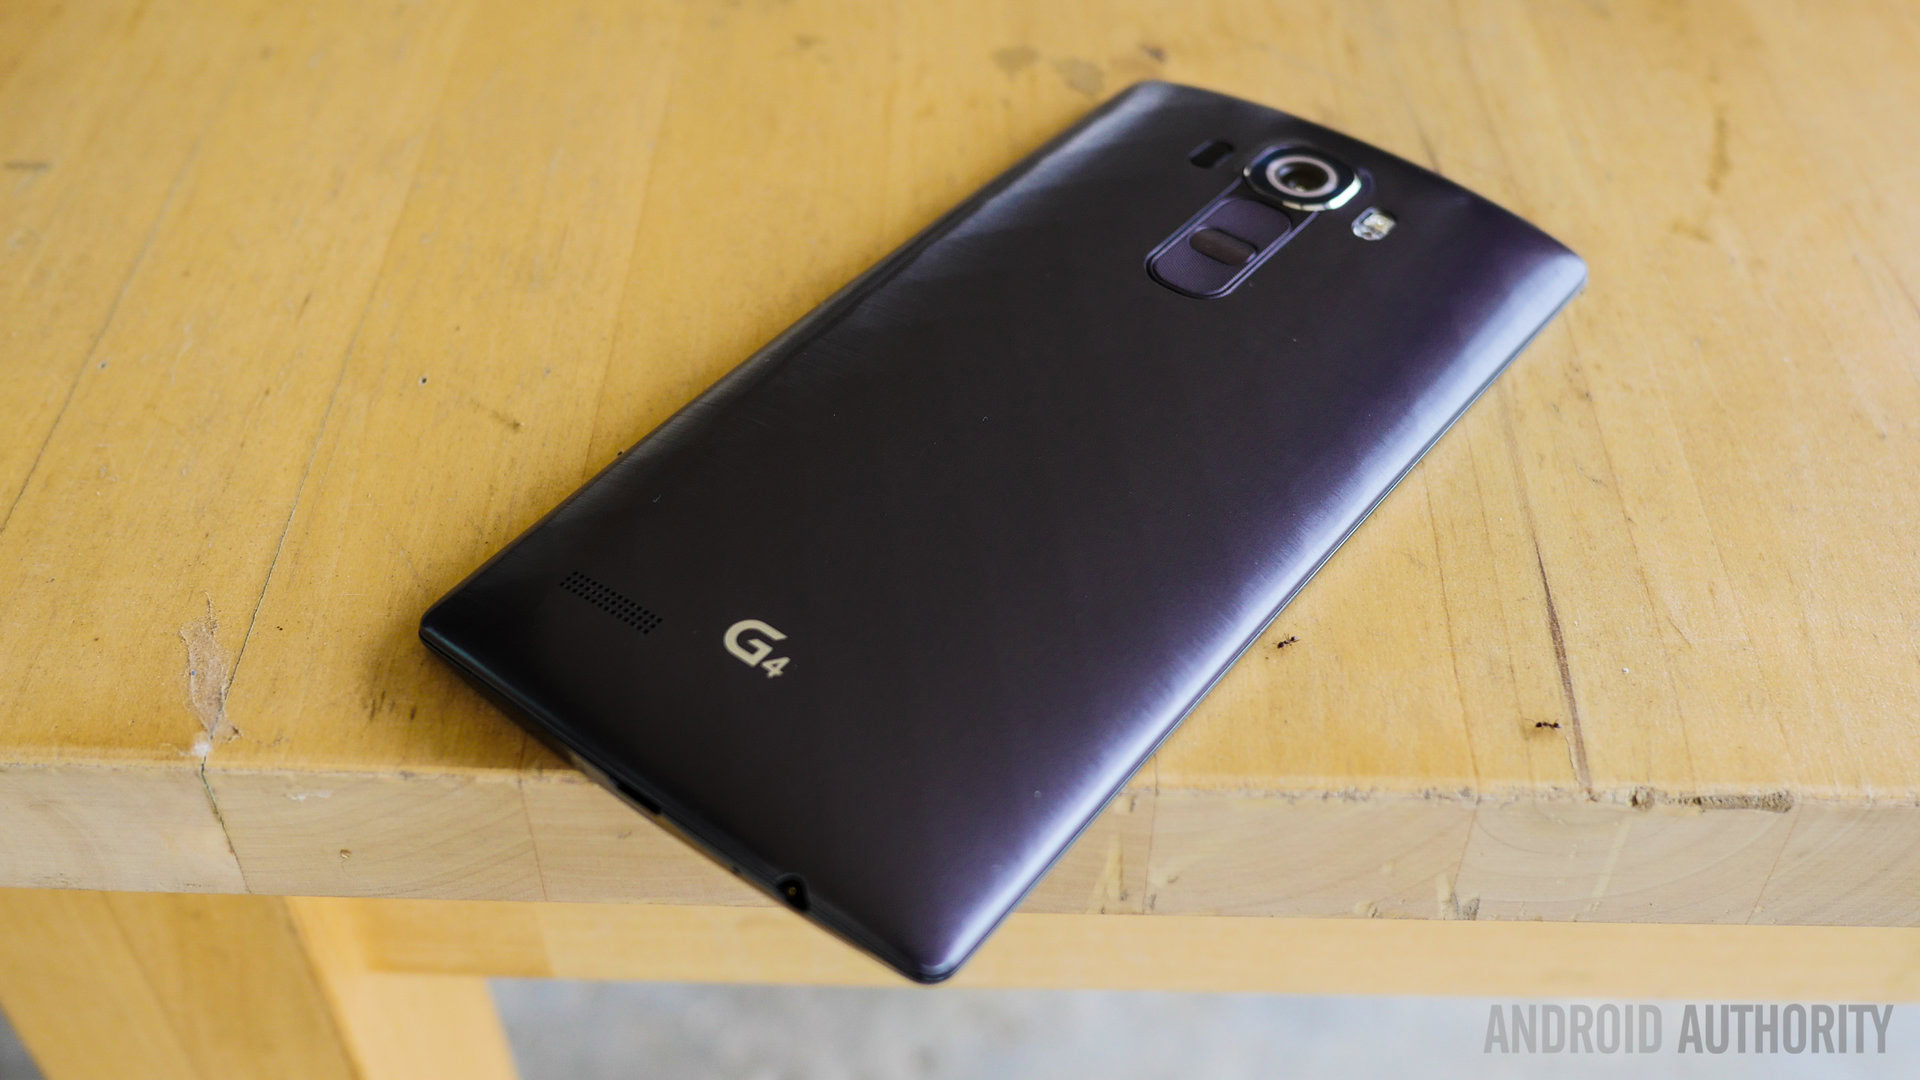 LG G4, Official Marshmallow update in Korea. : r/Android